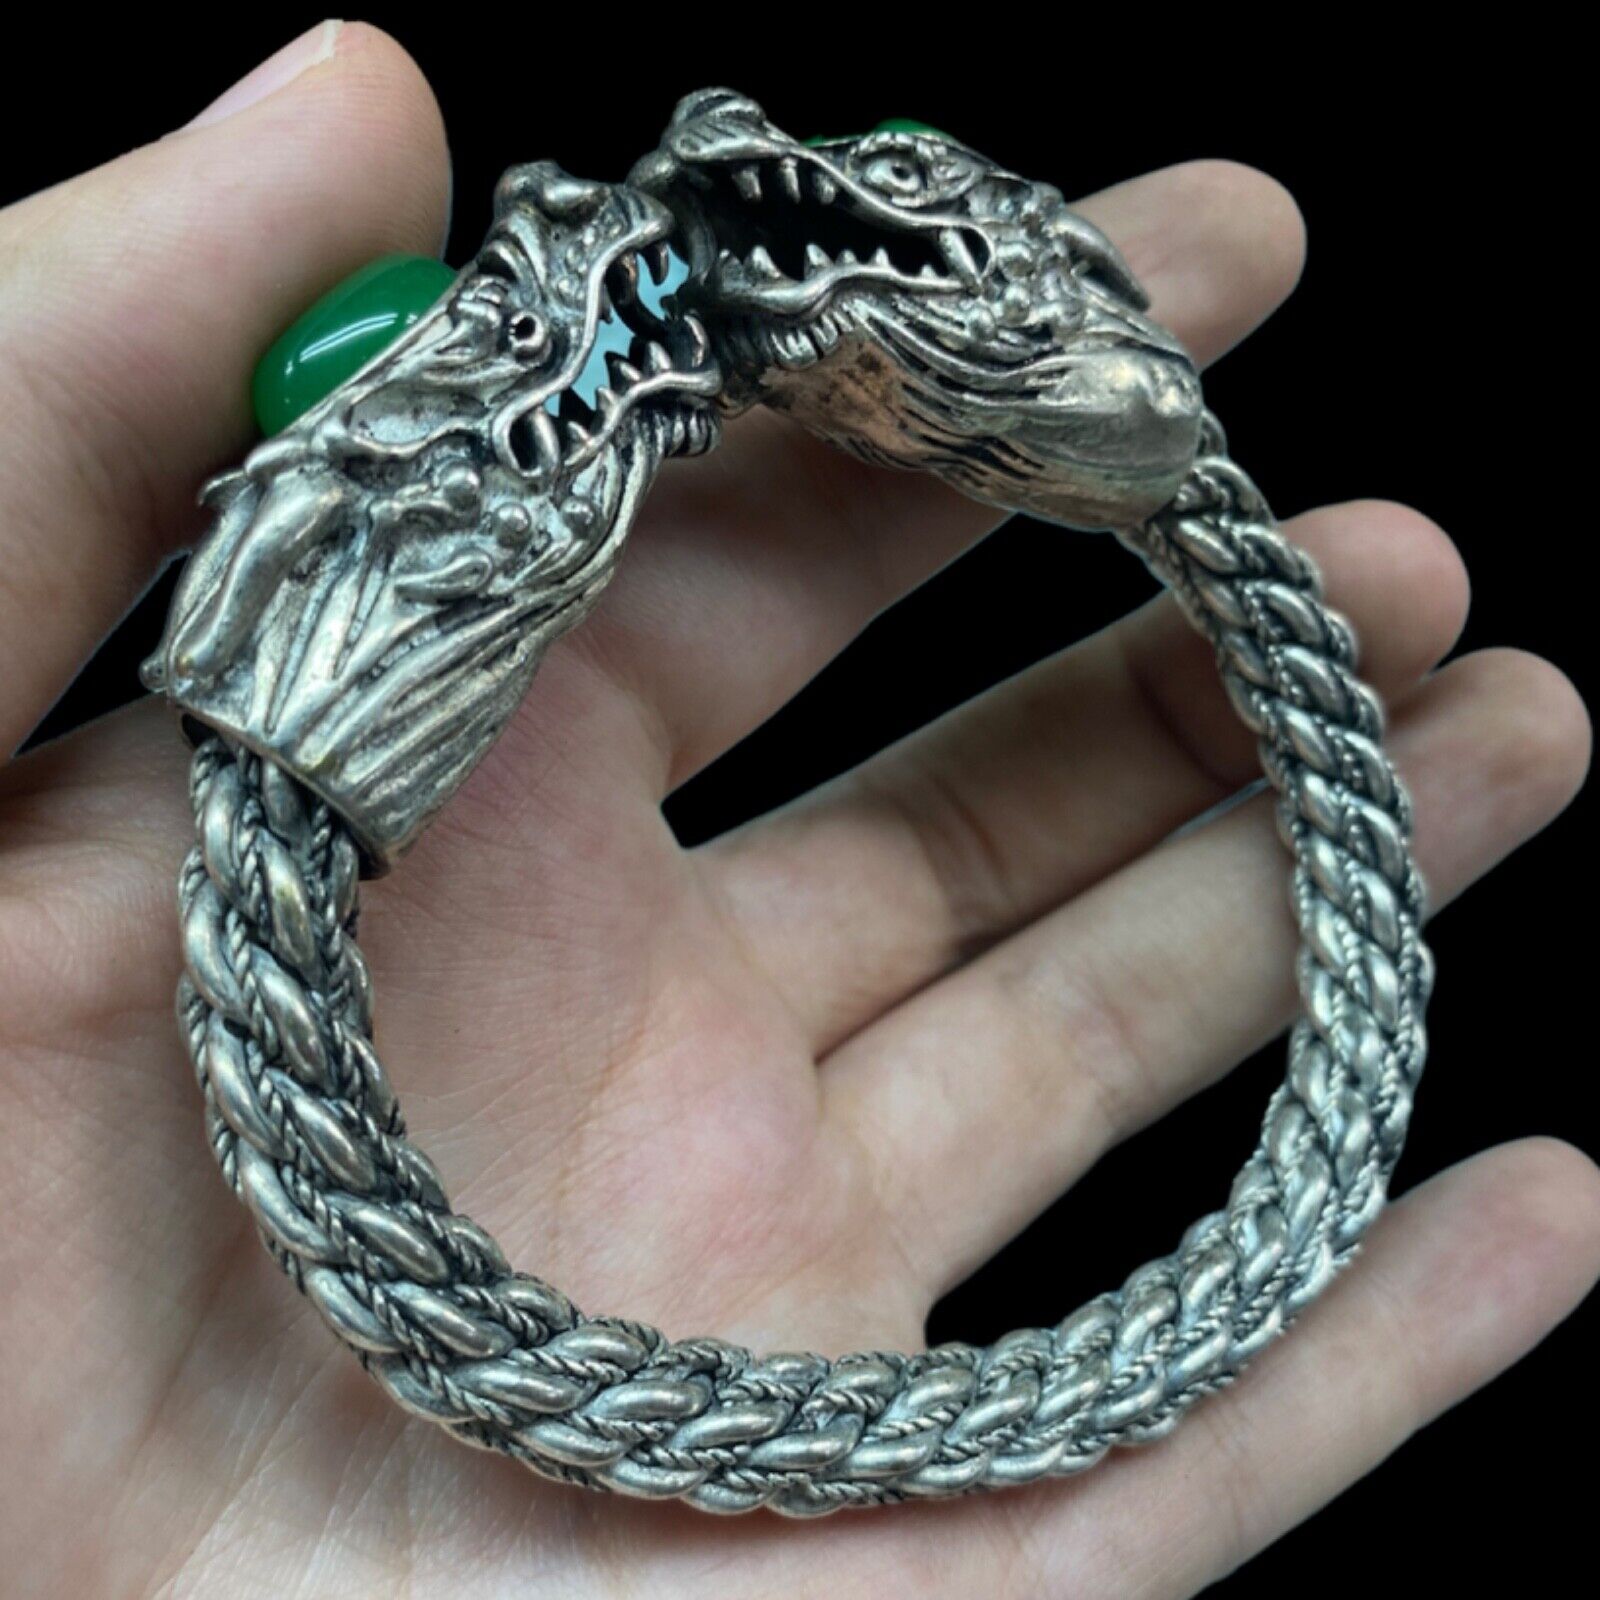 ANCIENT VIKING TWISTED DRAGON SILVER BRACELET WITH JADE STONE